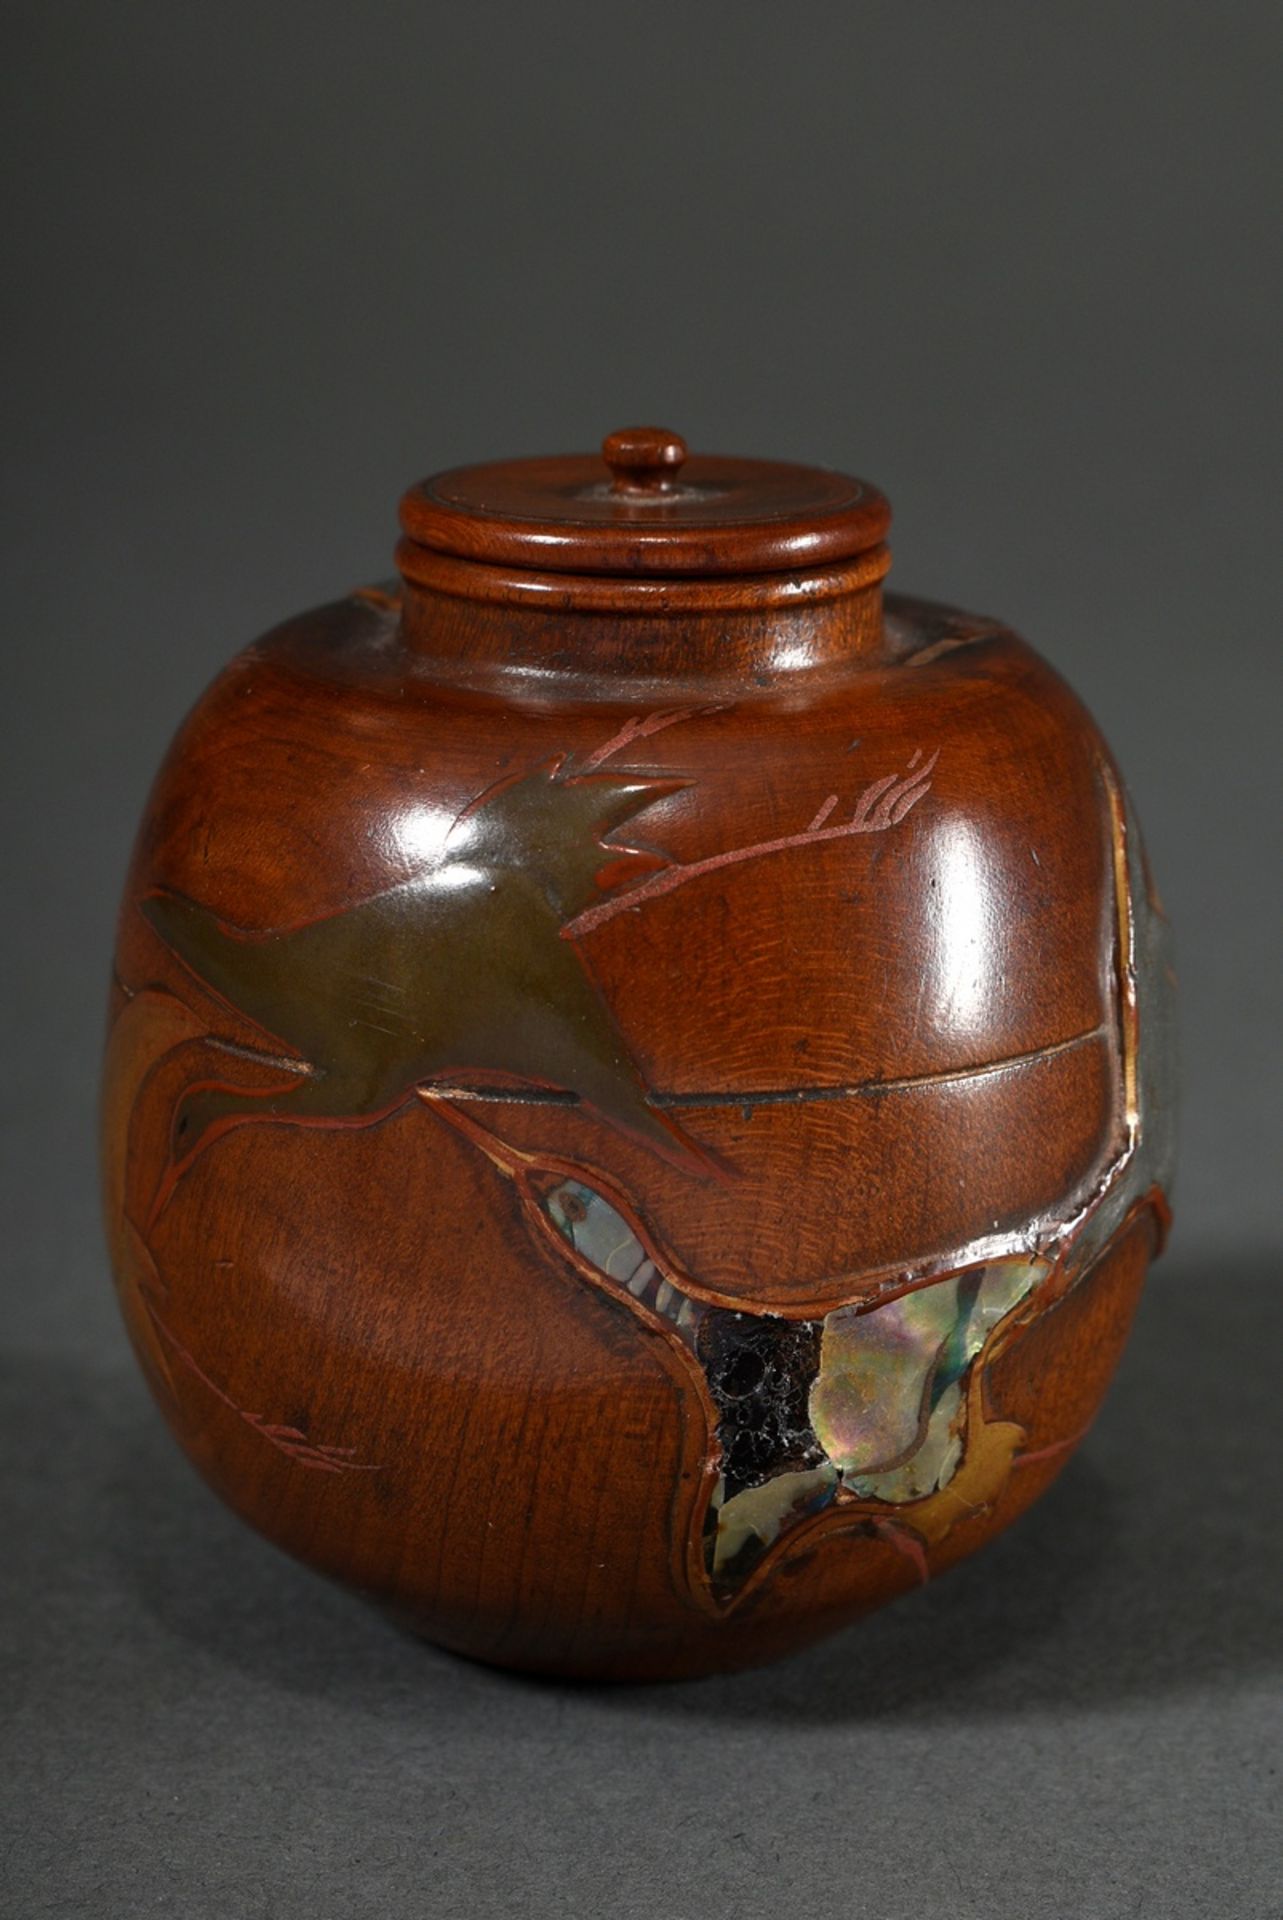 Japanese boxwood "Natsume" tea caddy with lacquer and mother-of-pearl inlays "7 Cranes", Meiji/Show - Image 3 of 6